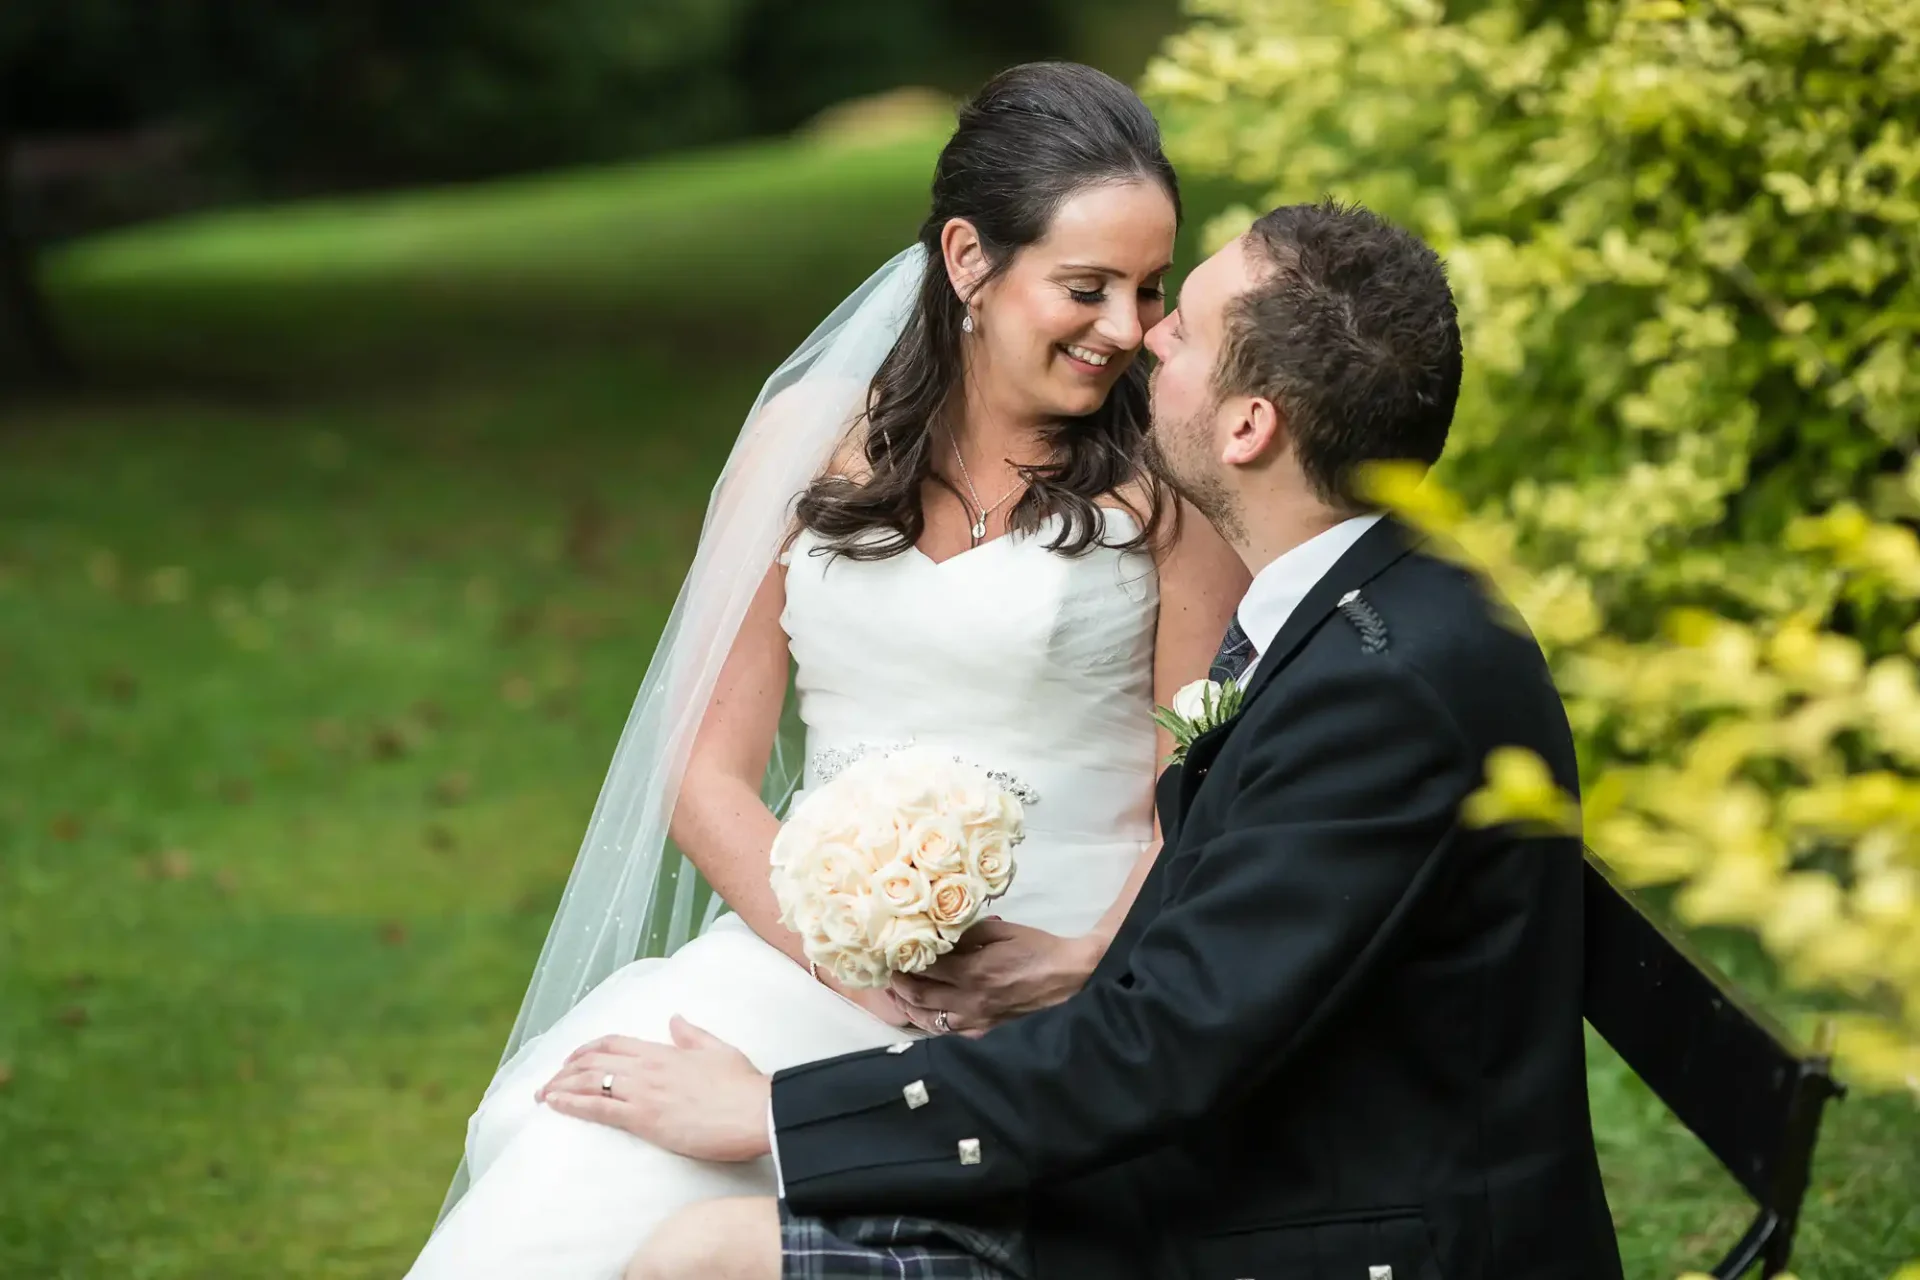 Bride and groom sitting on a park bench, smiling lovingly at each other, surrounded by greenery. the bride holds a bouquet of white roses.